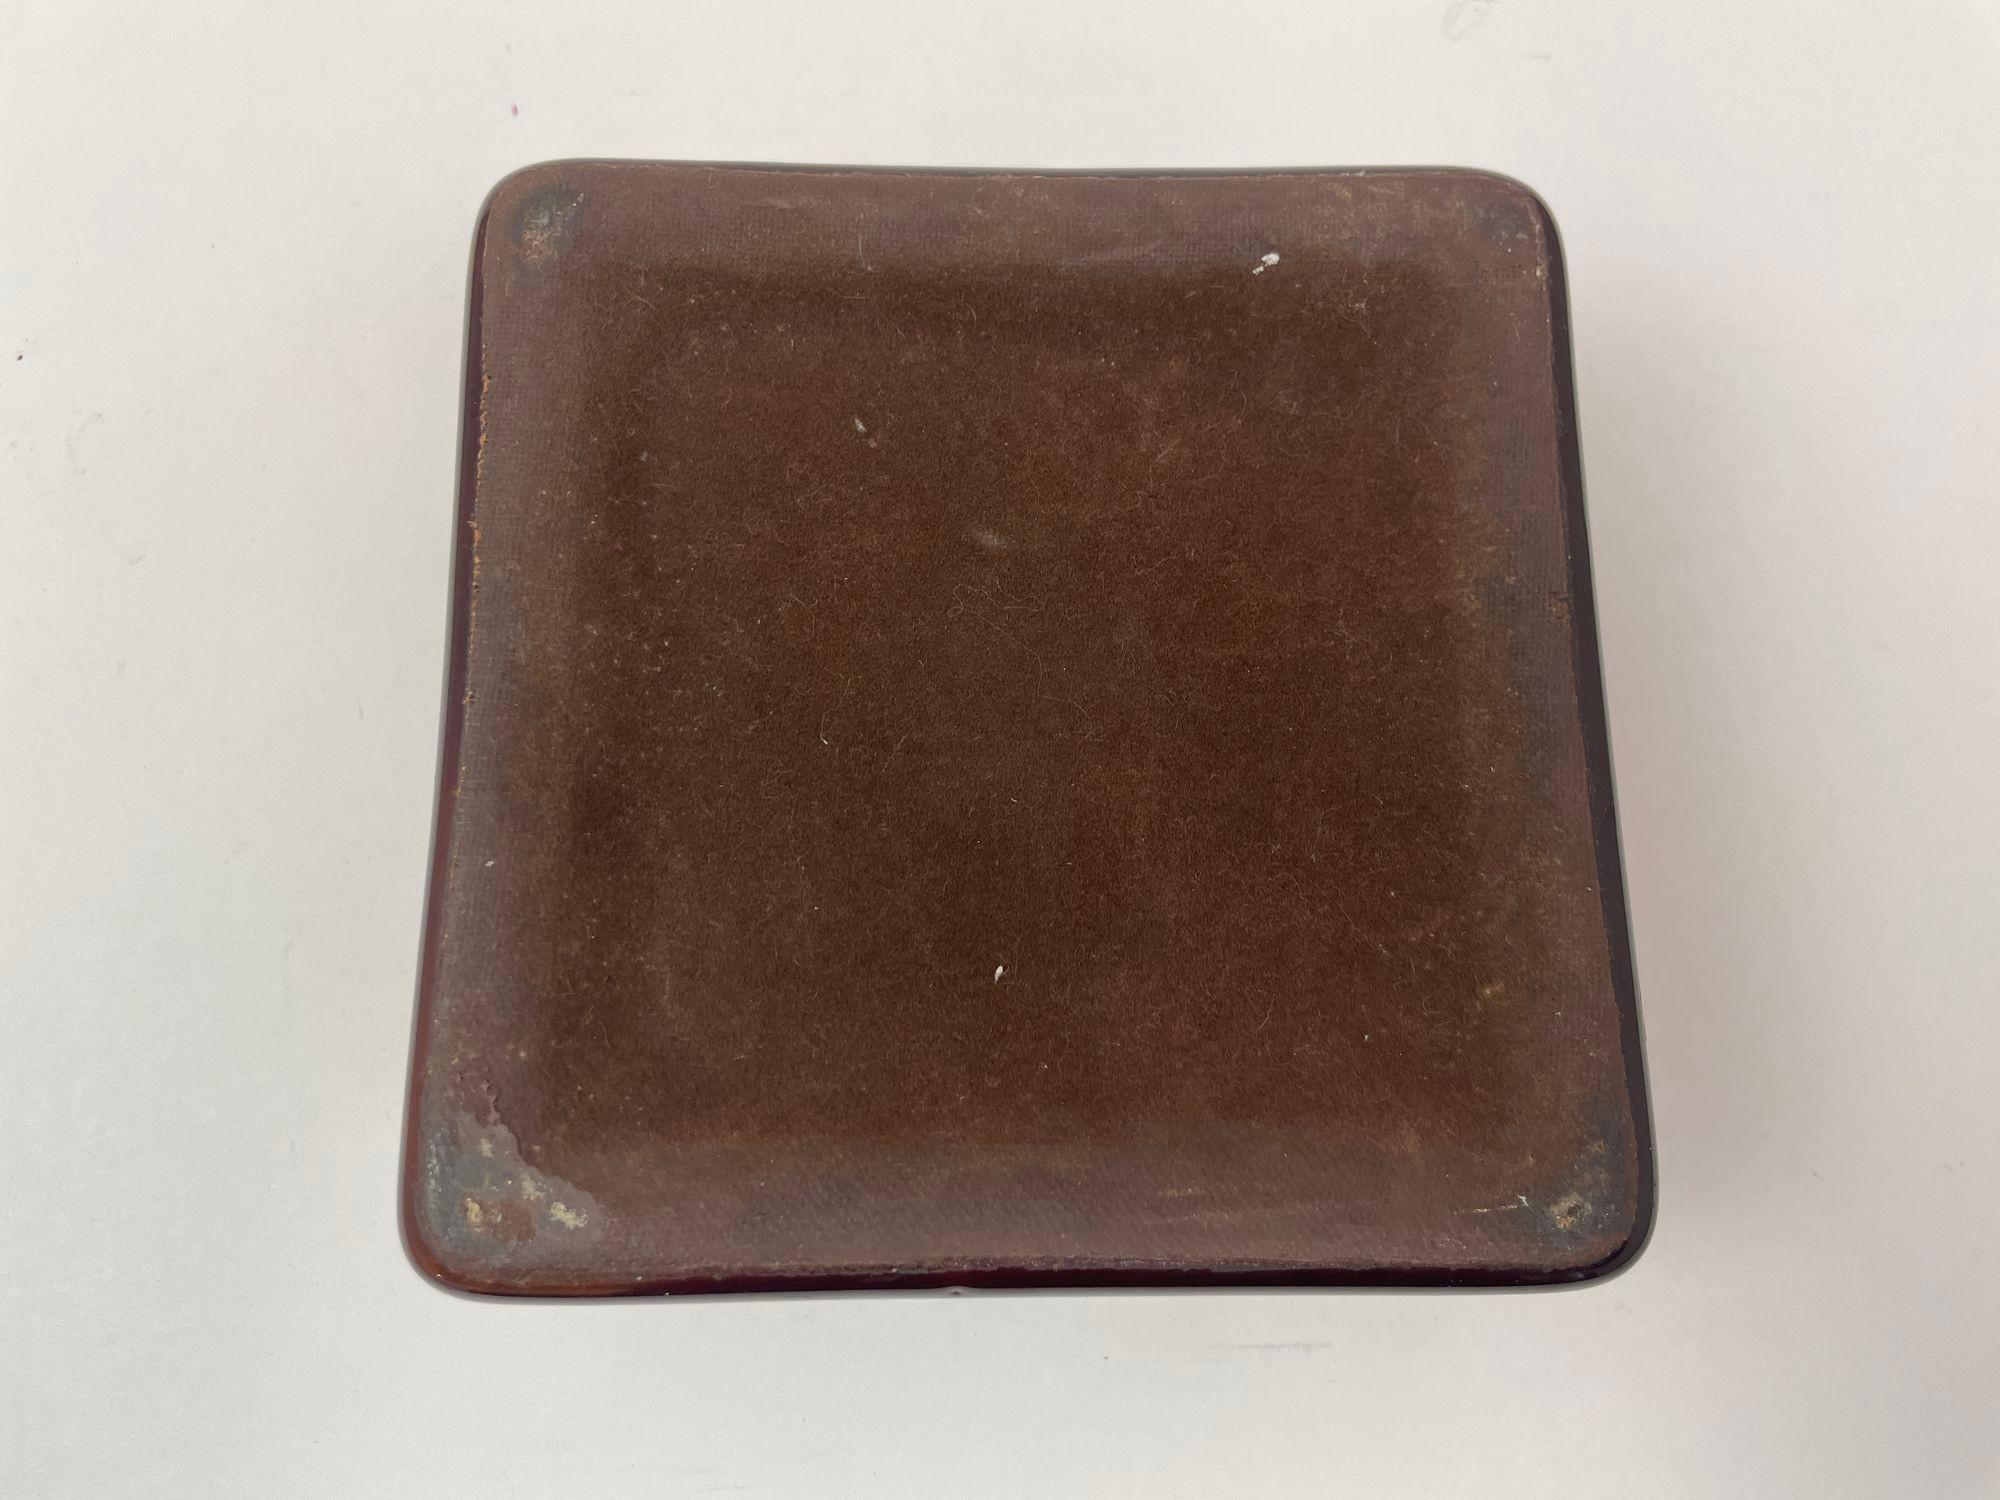 Vintage Brown Ceramic Ashtray Wrapped in Saddle Leather For Sale 5